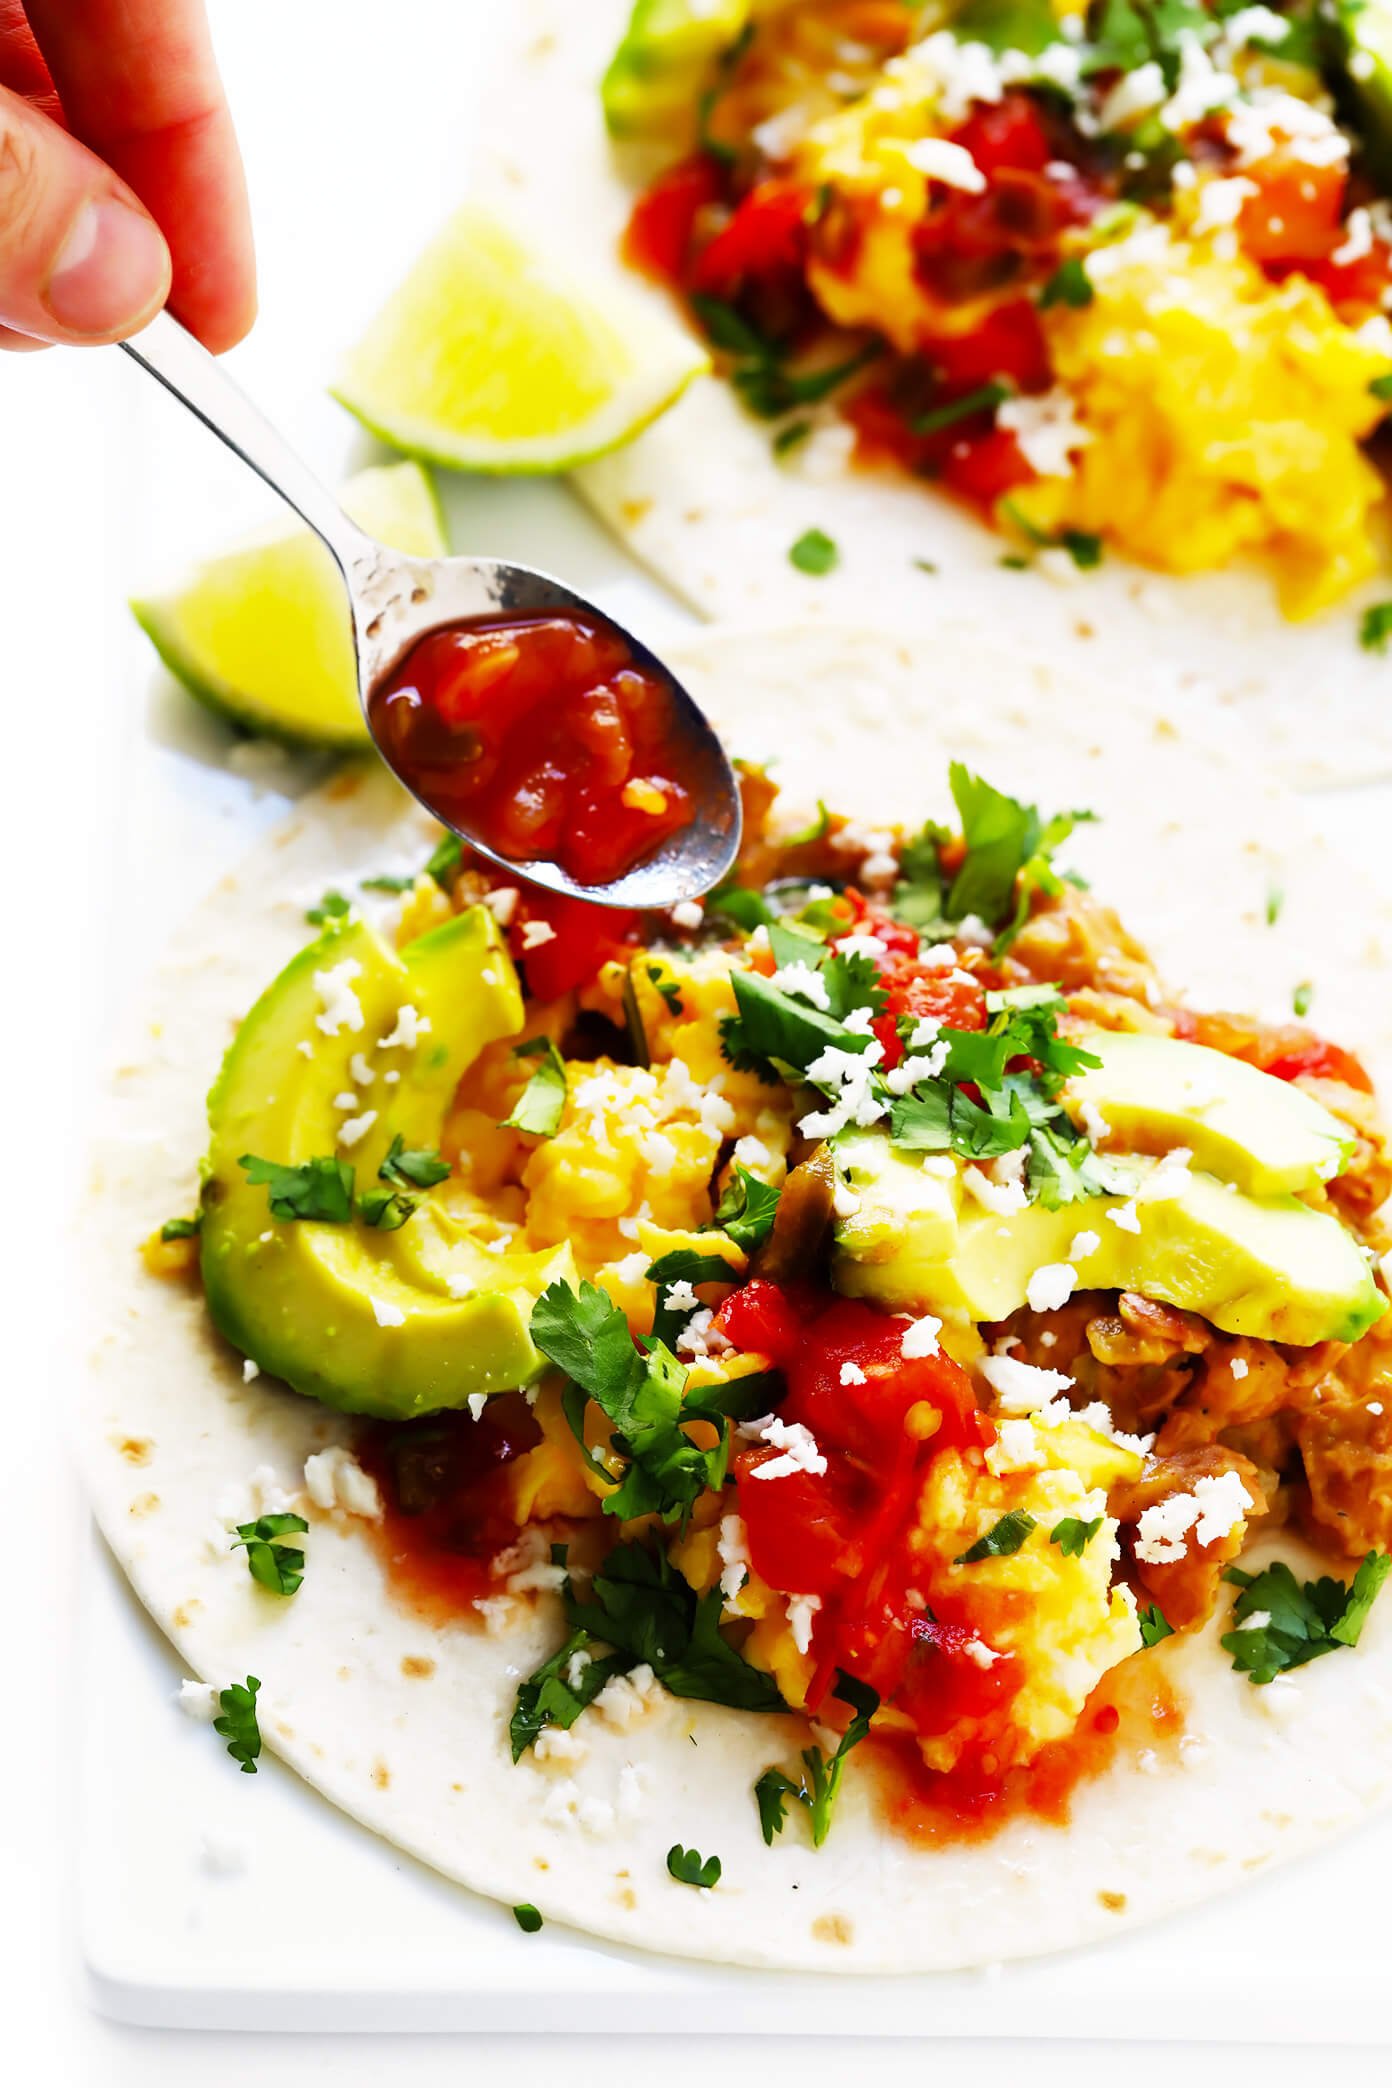 How To Make Breakfast Tacos